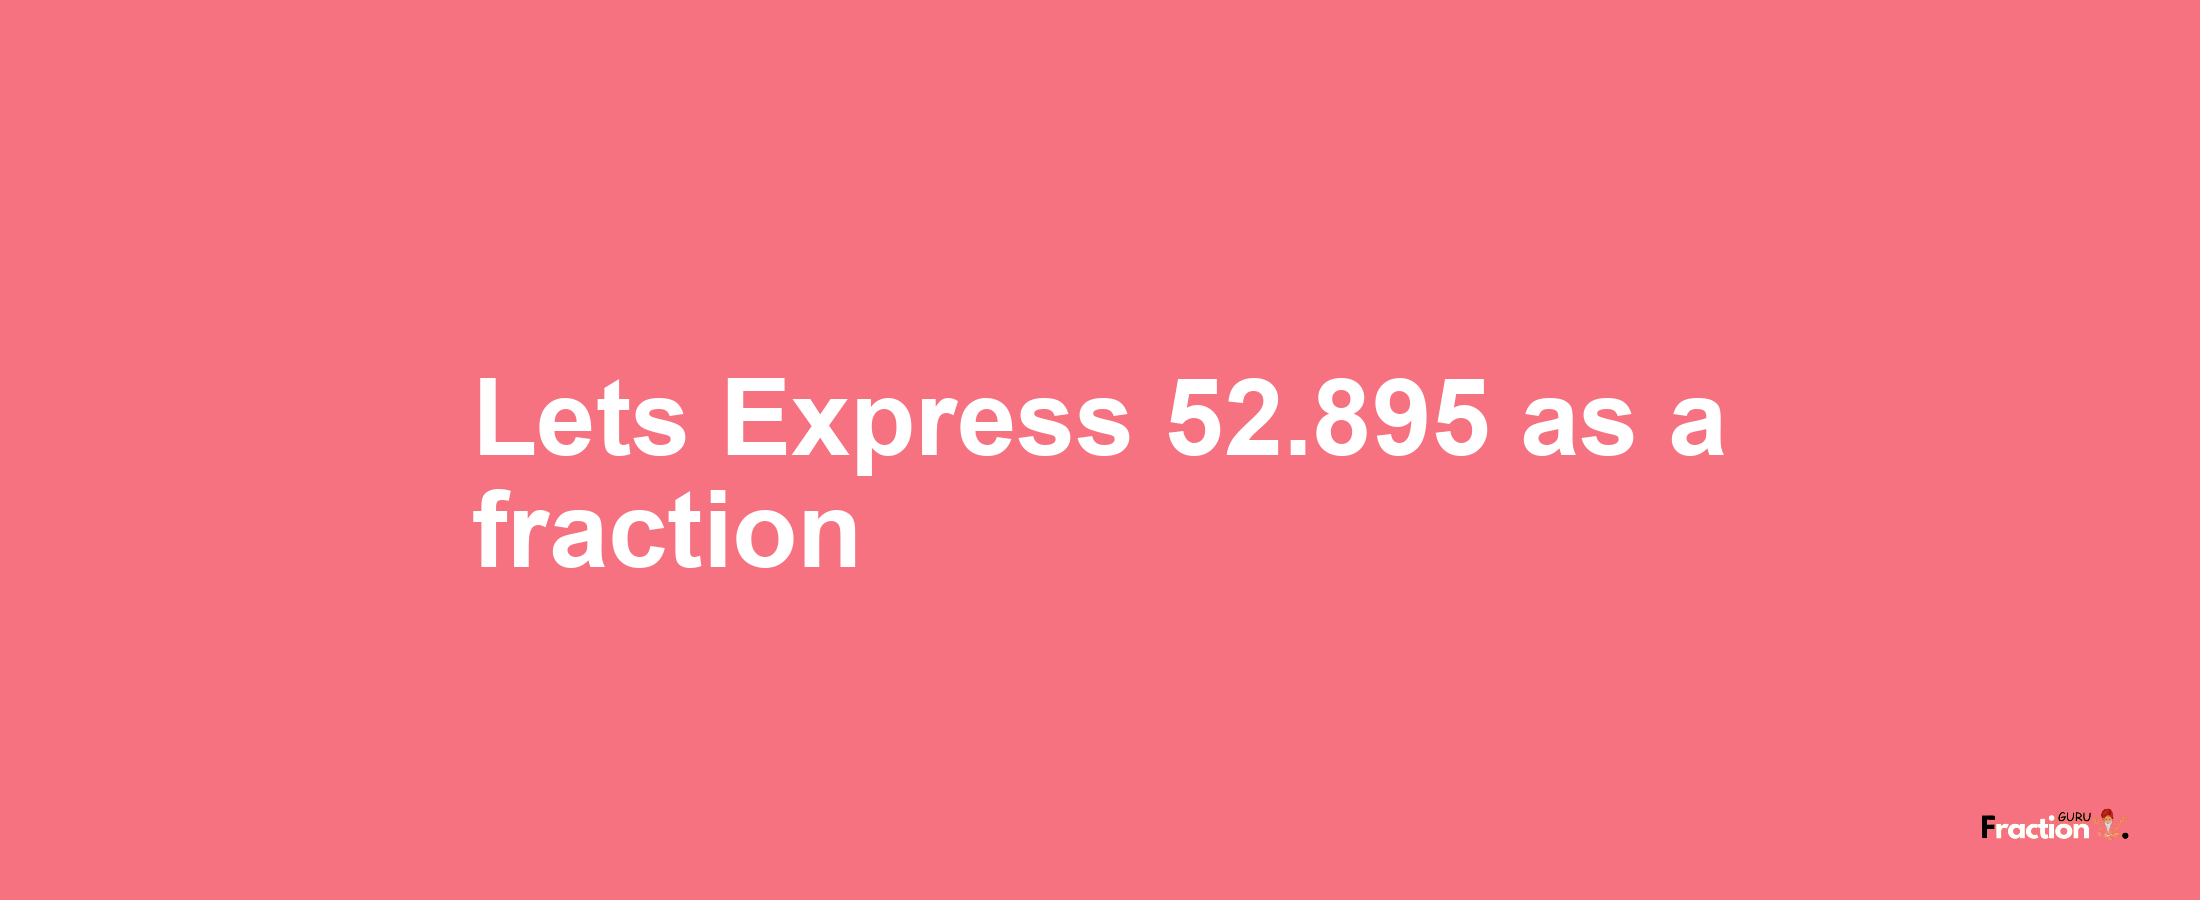 Lets Express 52.895 as afraction